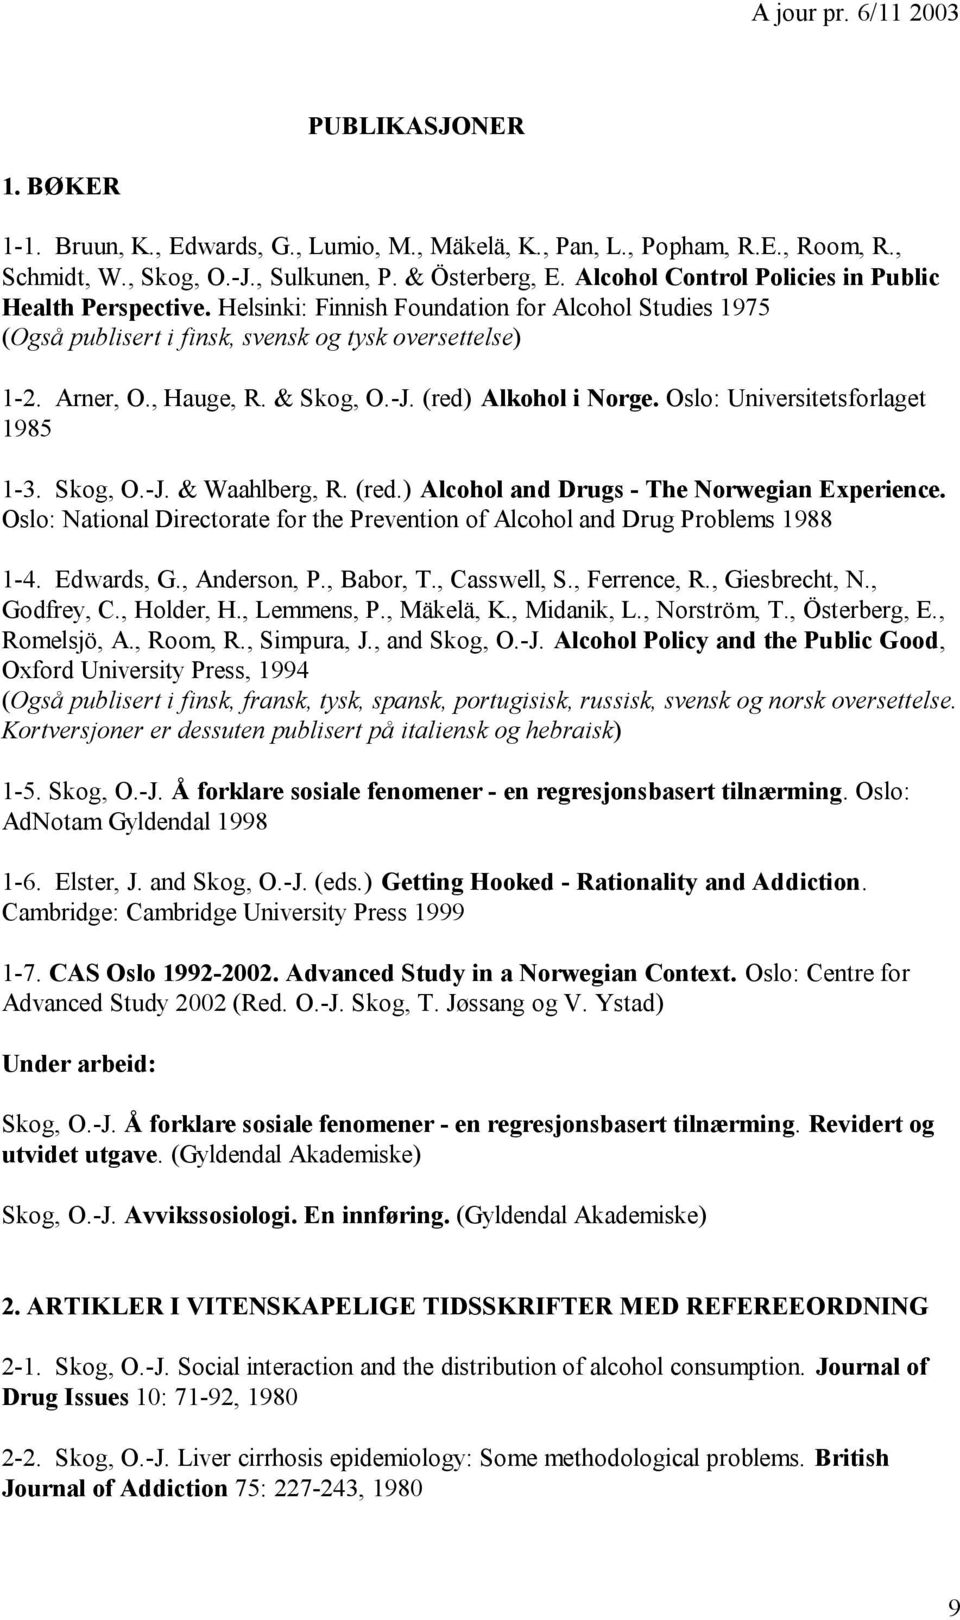 -J. (red) Alkohol i Norge. Oslo: Universitetsforlaget 1985 1-3. Skog, O.-J. & Waahlberg, R. (red.) Alcohol and Drugs - The Norwegian Experience.